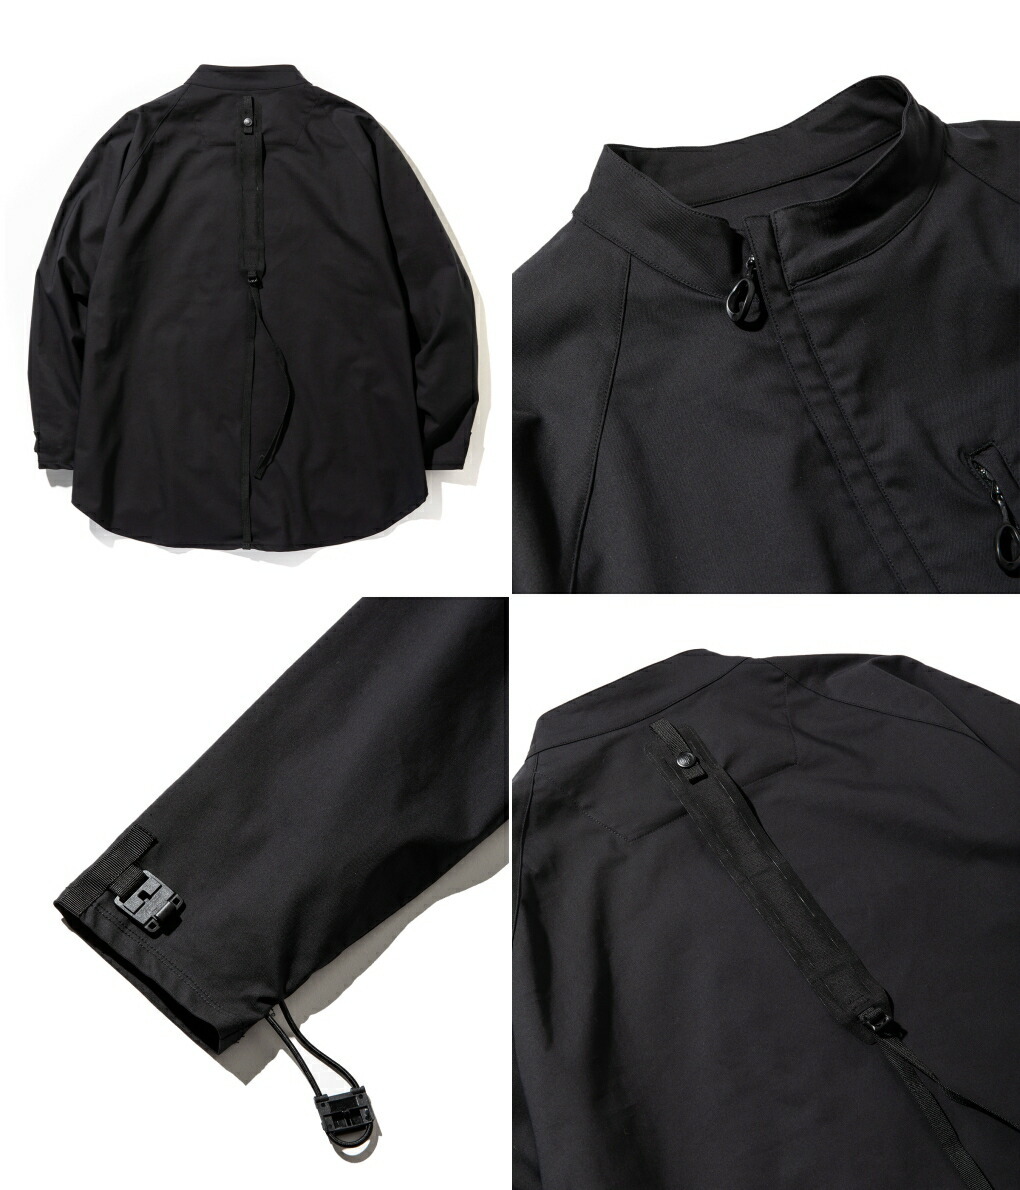 MOUT RECON TAILOR / マウトリーコンテーラー ： 3xdry field shirts